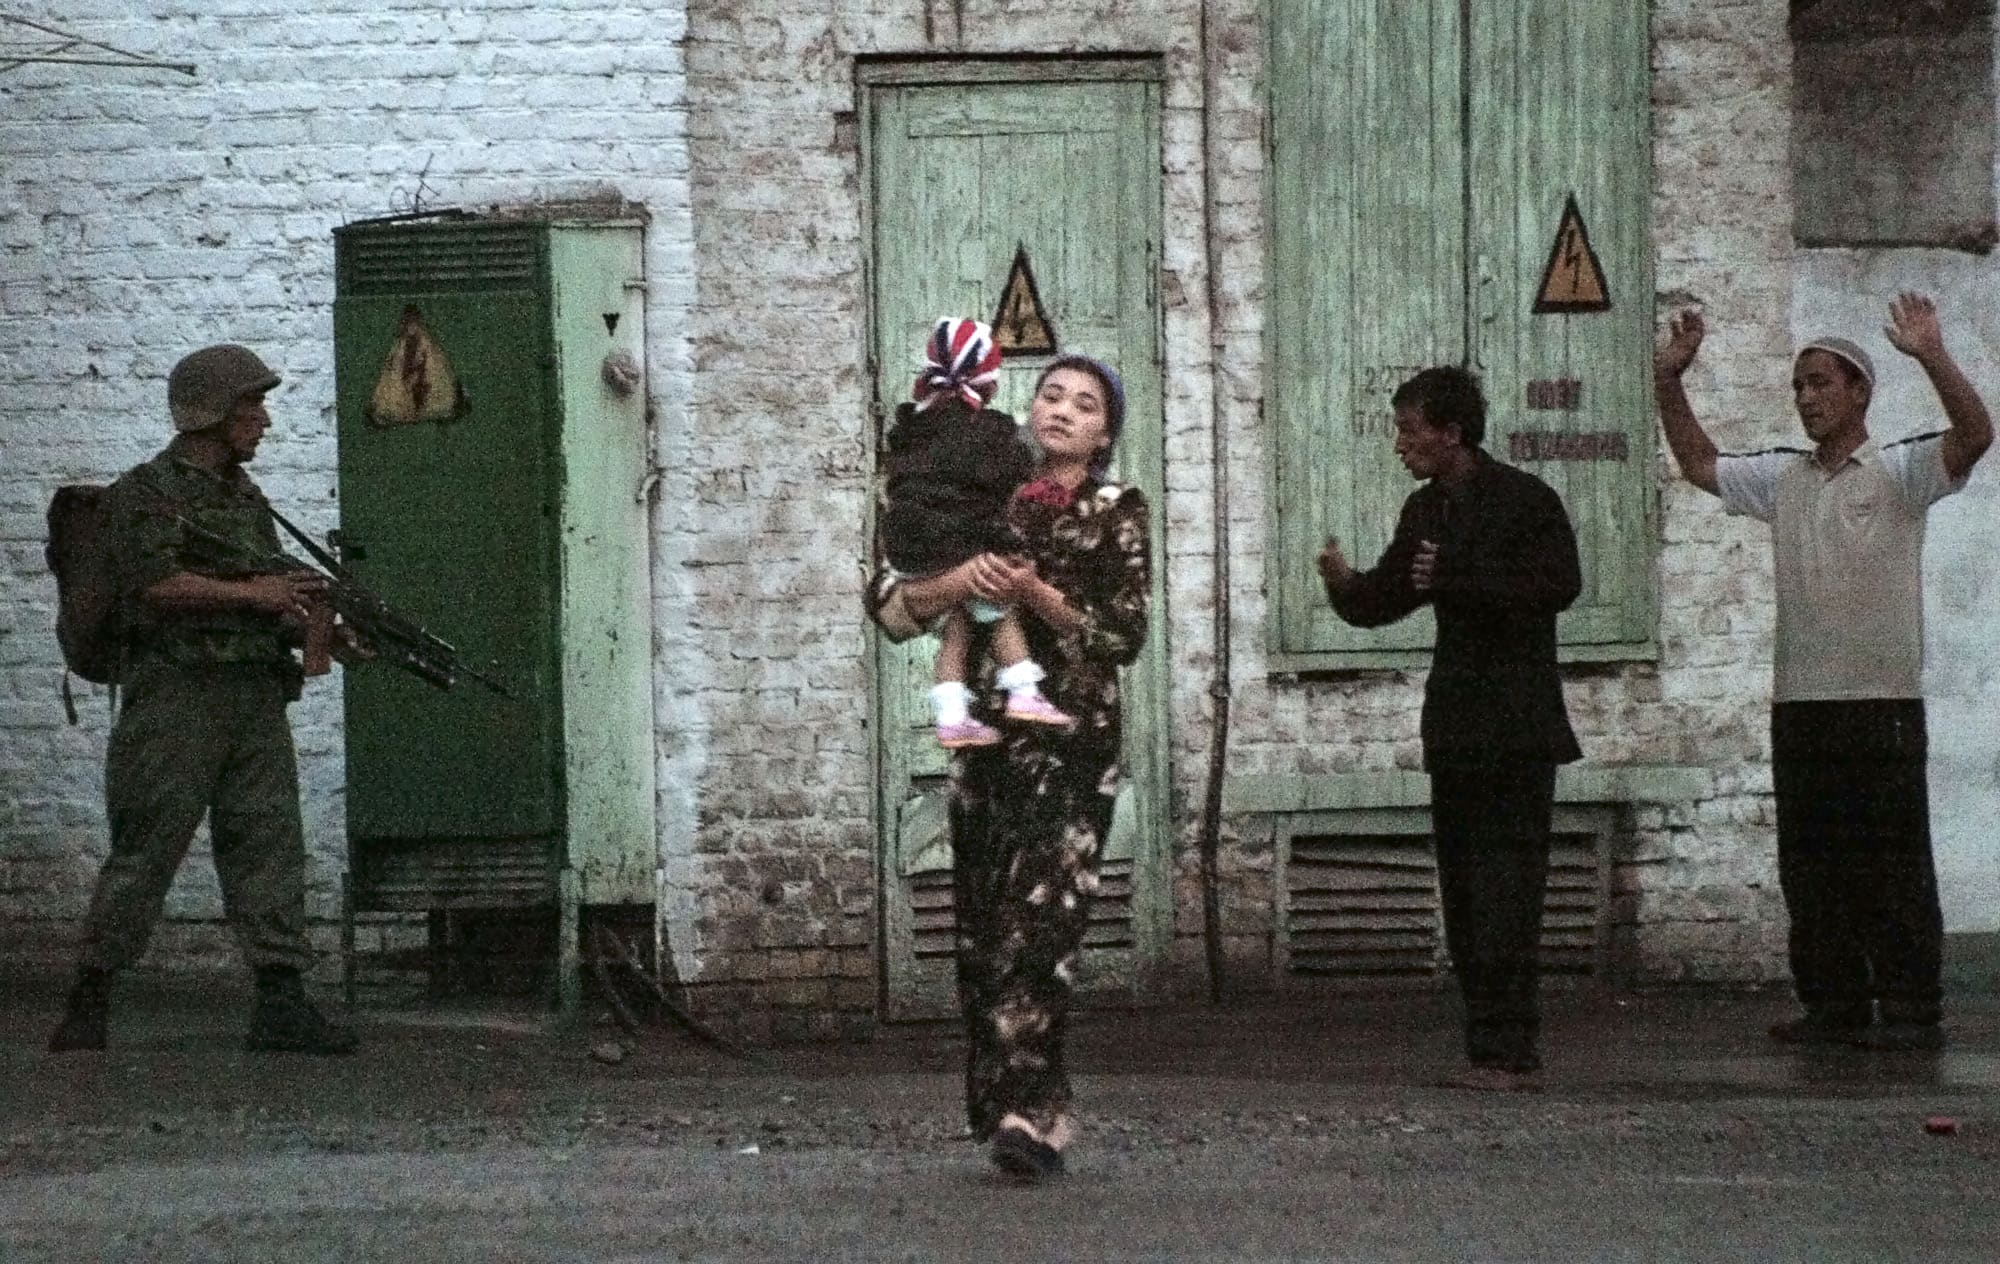 A local resident carrying a child, walks by a Uzbek soldier during the uprising in the city of Andijan, Uzbekistan in this Friday, May 13, 2005 file photo, AP Photo/ Efrem Lukatsky, File